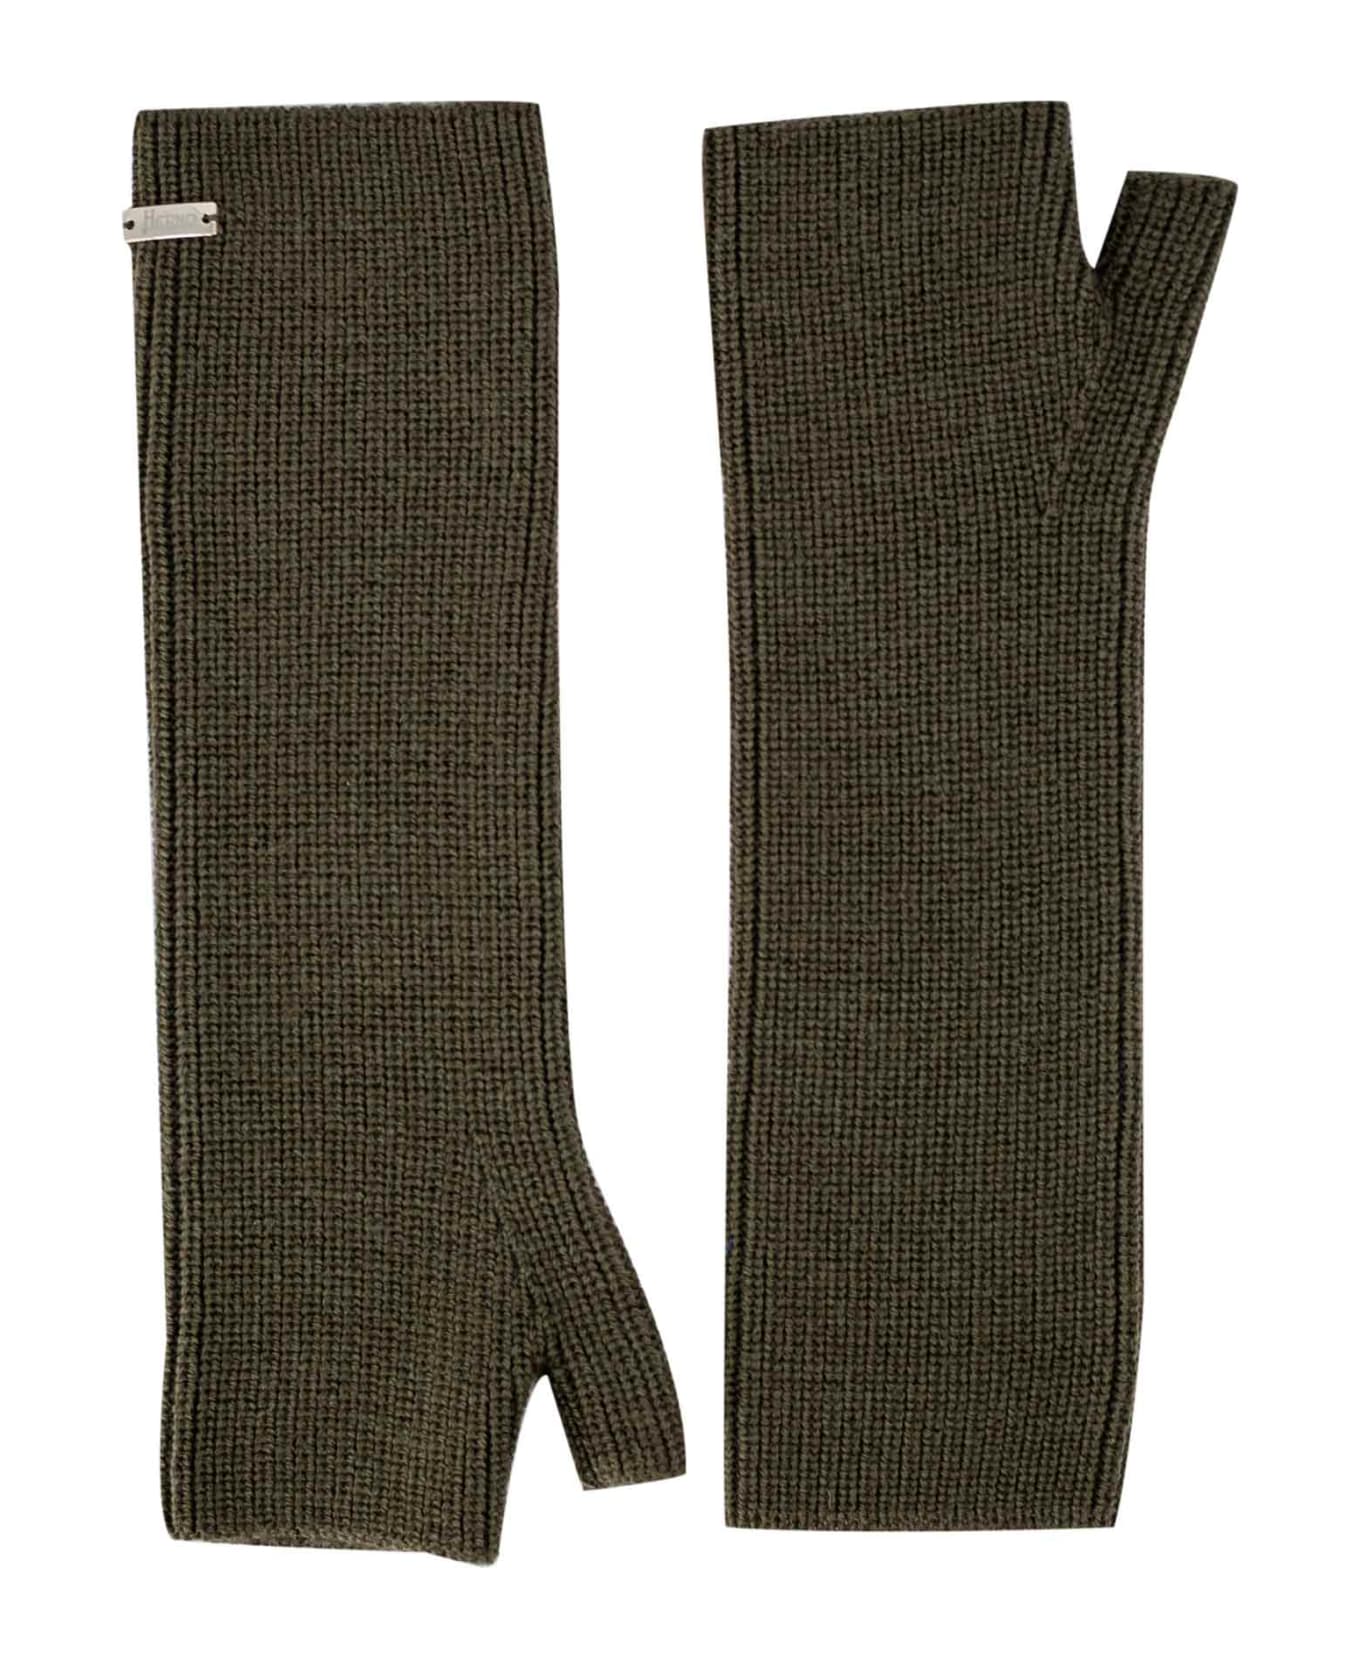 Herno Wool Blend Knitted Gloves - Militar green